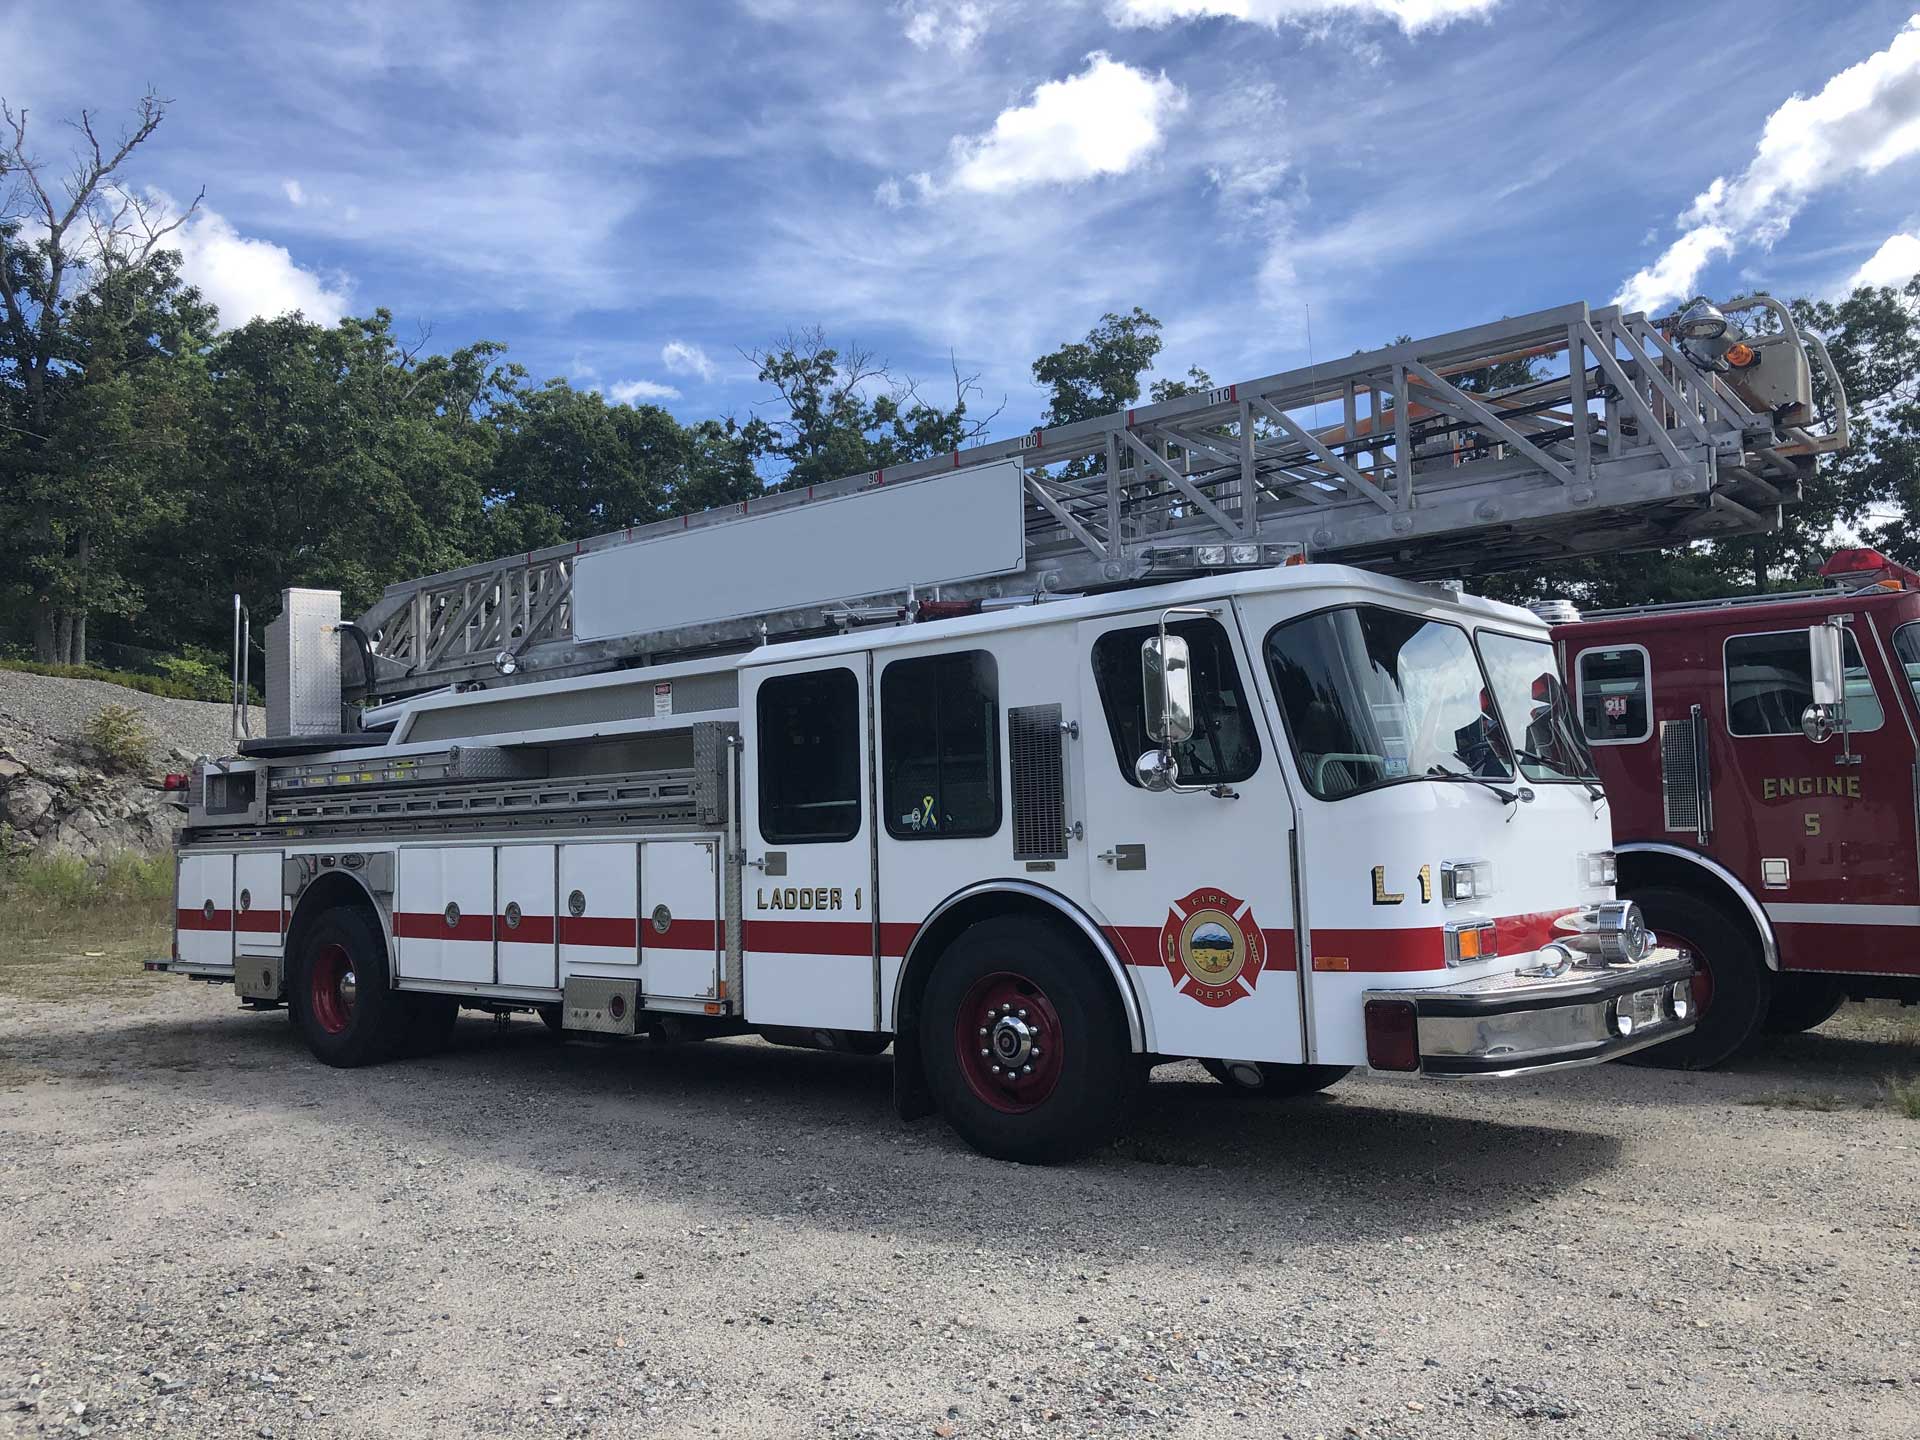 what ladder unit is with engine 30 in emergenyc